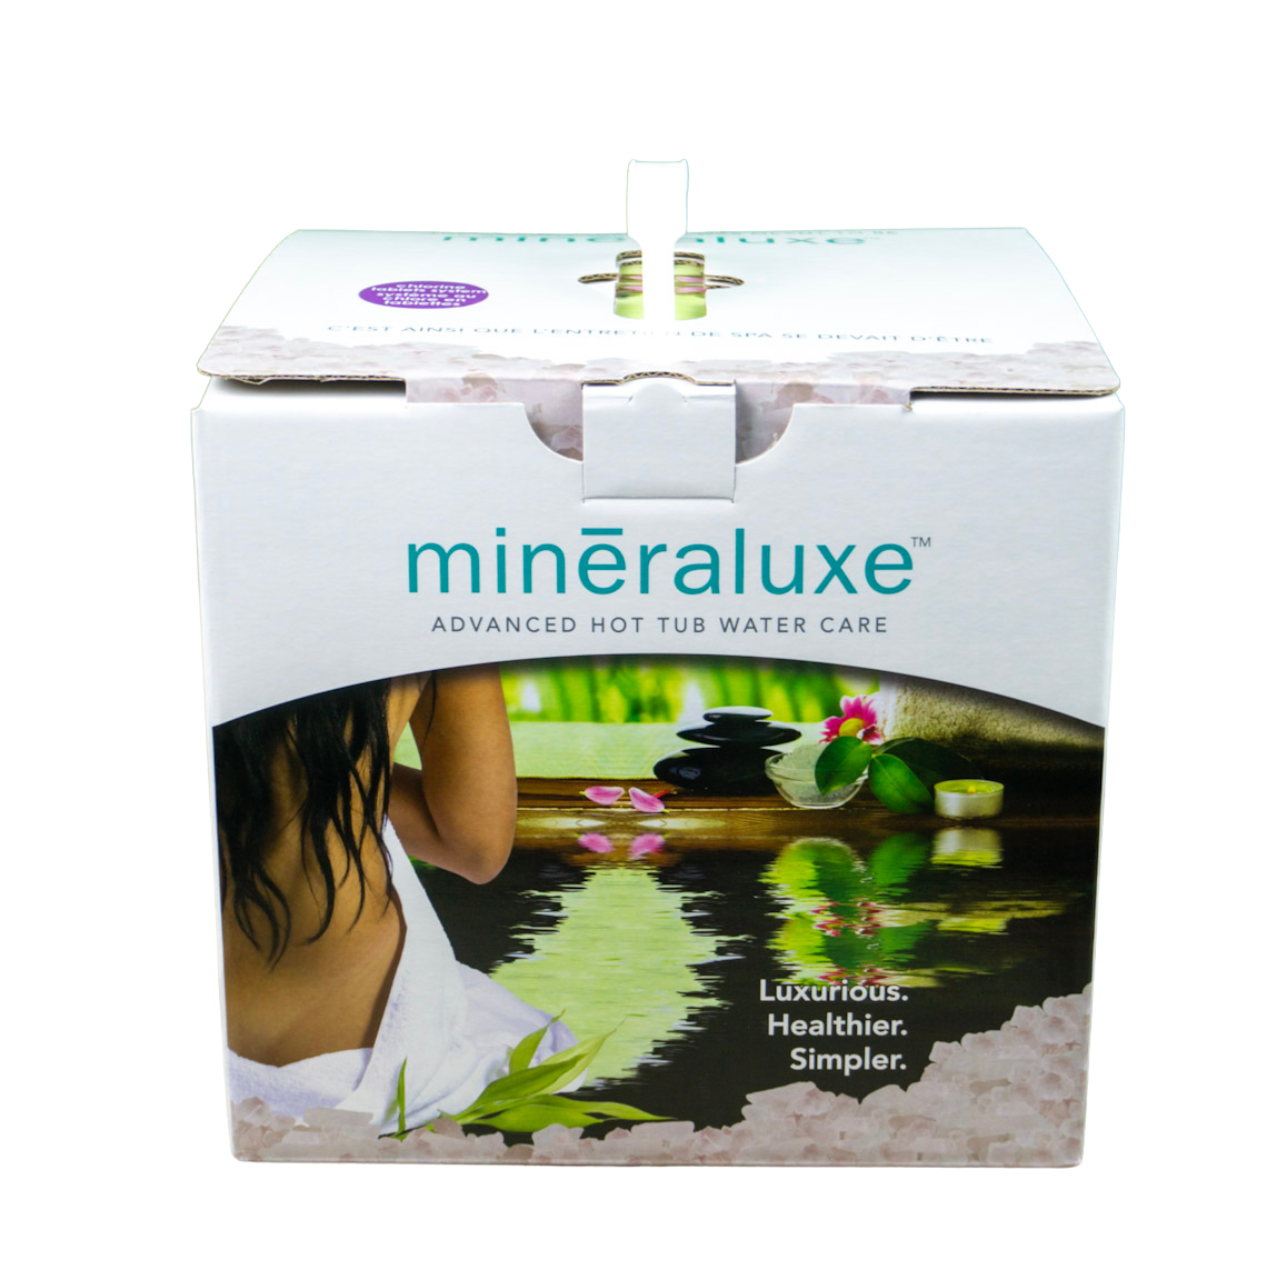 Mineraluxe™ 3 Month Chlorine Tablet Mineraluxe System